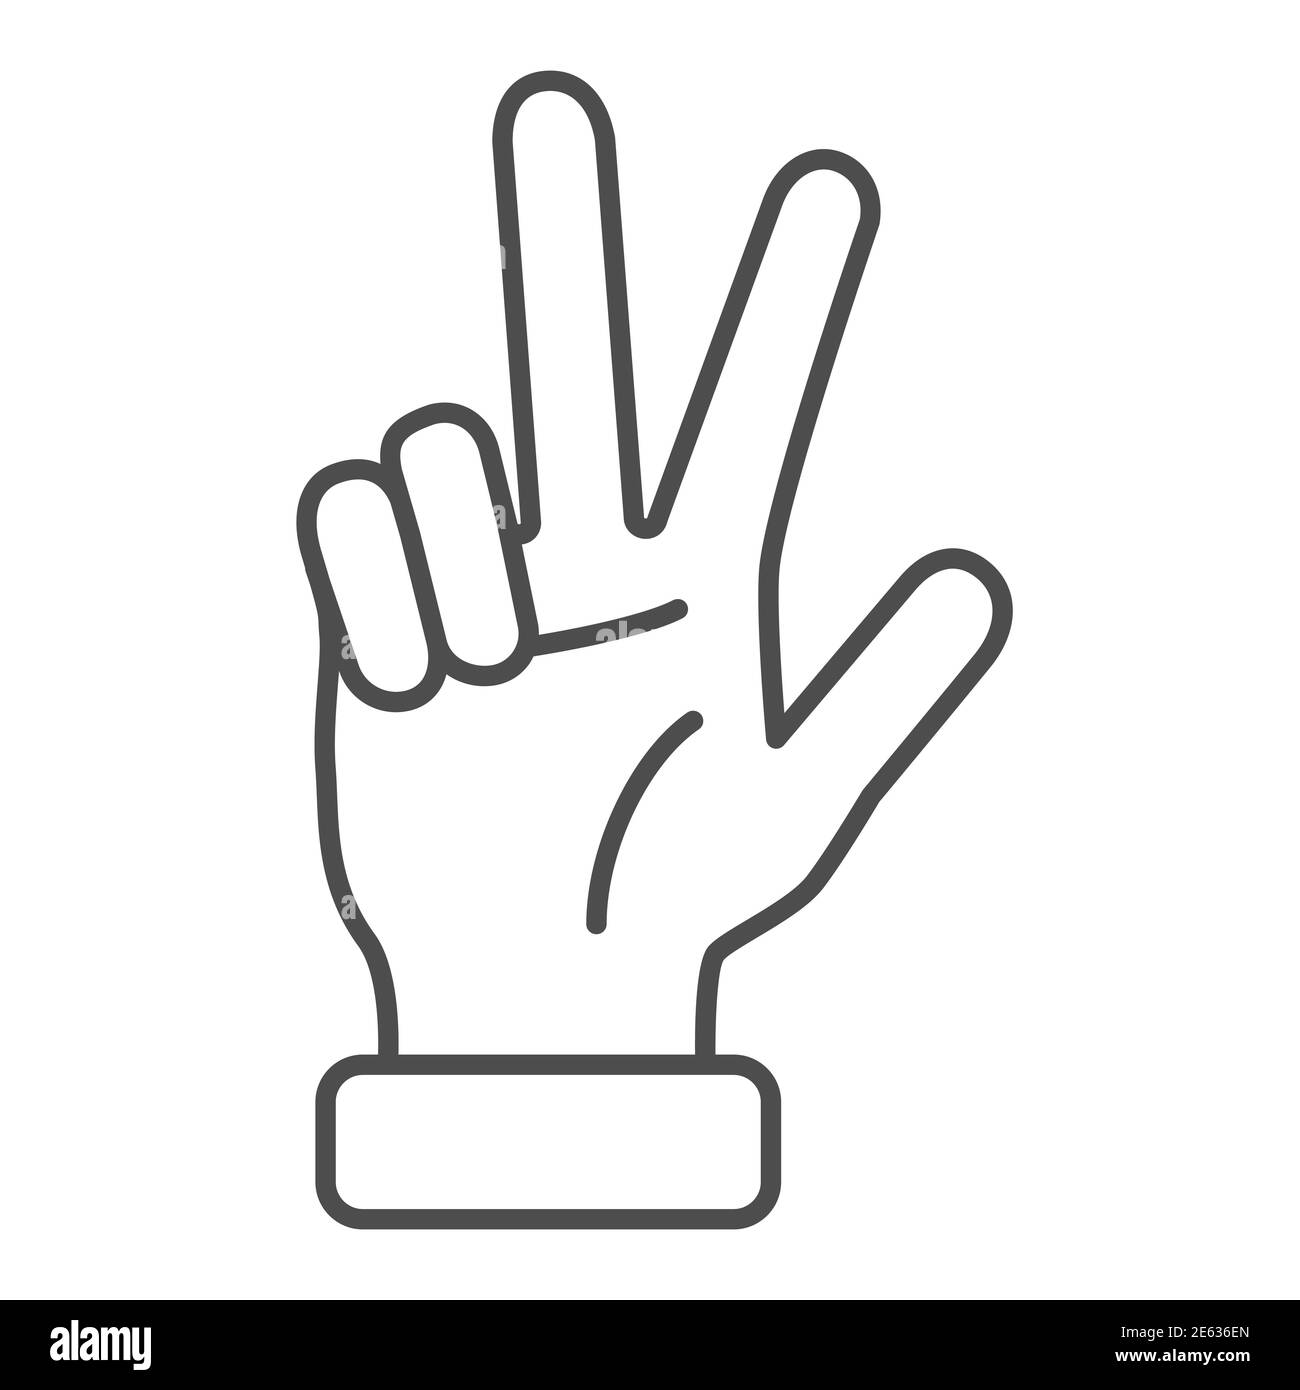 Hand showing three fingers thin line icon, Hand gestures concept, Three finger gesture sign on white background, hand showing number three icon in Stock Vector